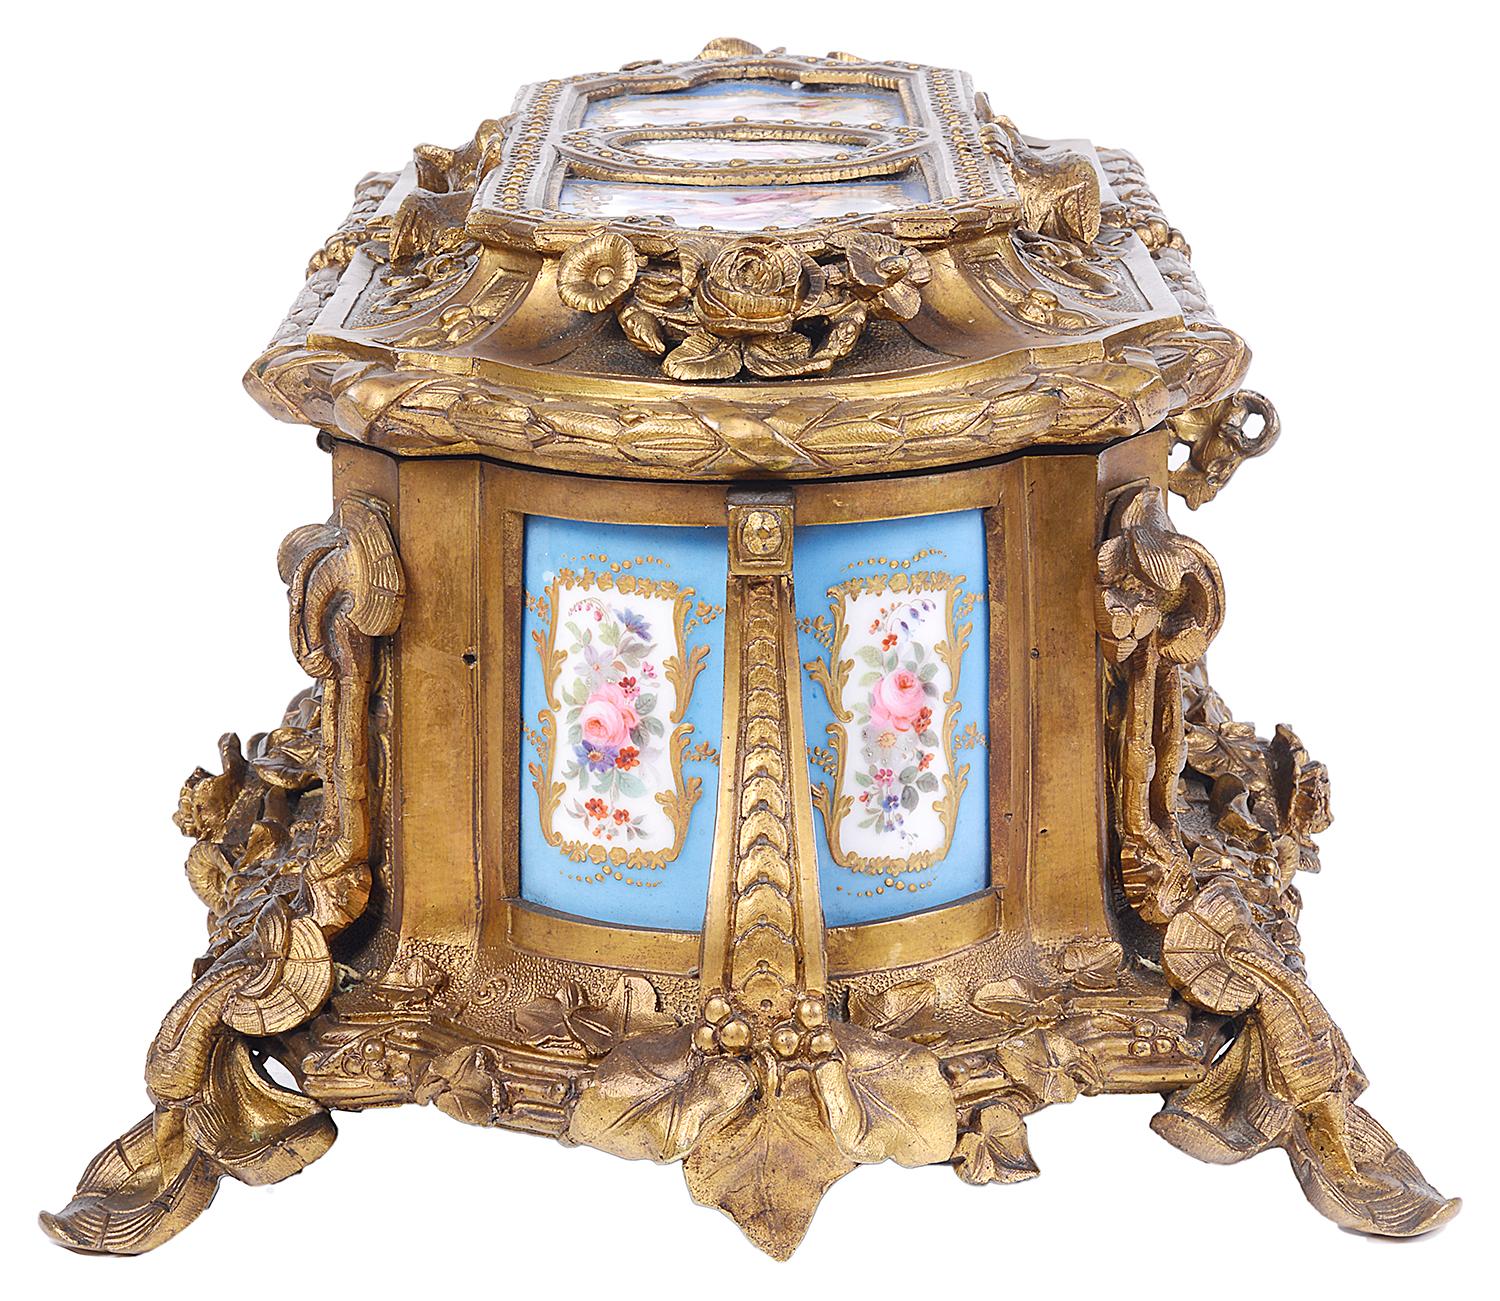 Gilt French Sevres Style Porcelain and Ormolu Casket, 19th Century